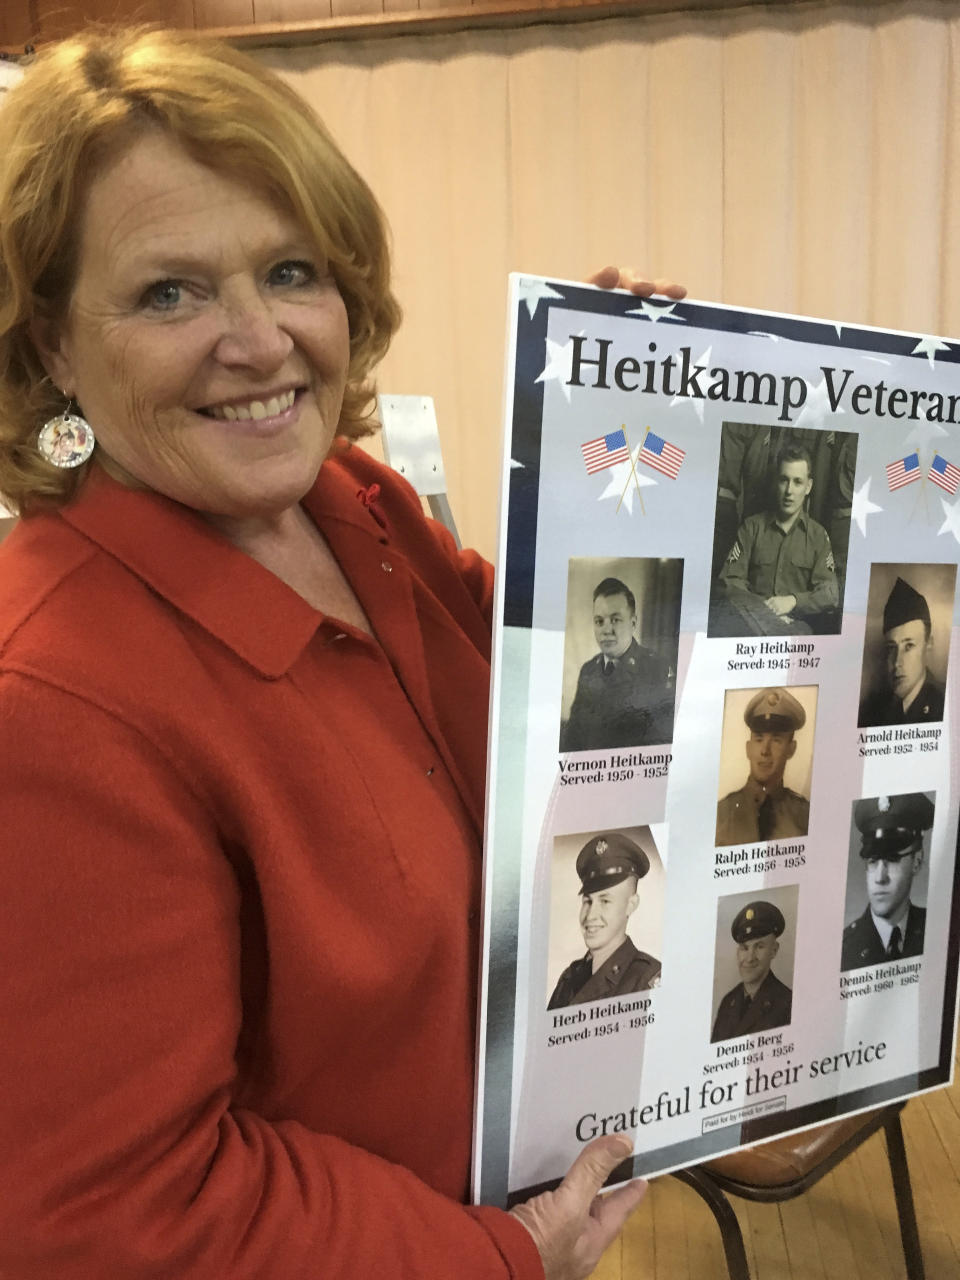 North Dakota Democratic Sen. Heidi Heitkamp holds up a poster of her relatives who have served in the military on Tuesday, Oct. 23, 2018 in Bismarck, North Dakota. Former Defense Secretary Chuck Hagel is campaigning across the state for Heitkamp, who is viewed as one of the most vulnerable candidates among red-state Democrats in the Senate. (AP Photo/James MacPherson)